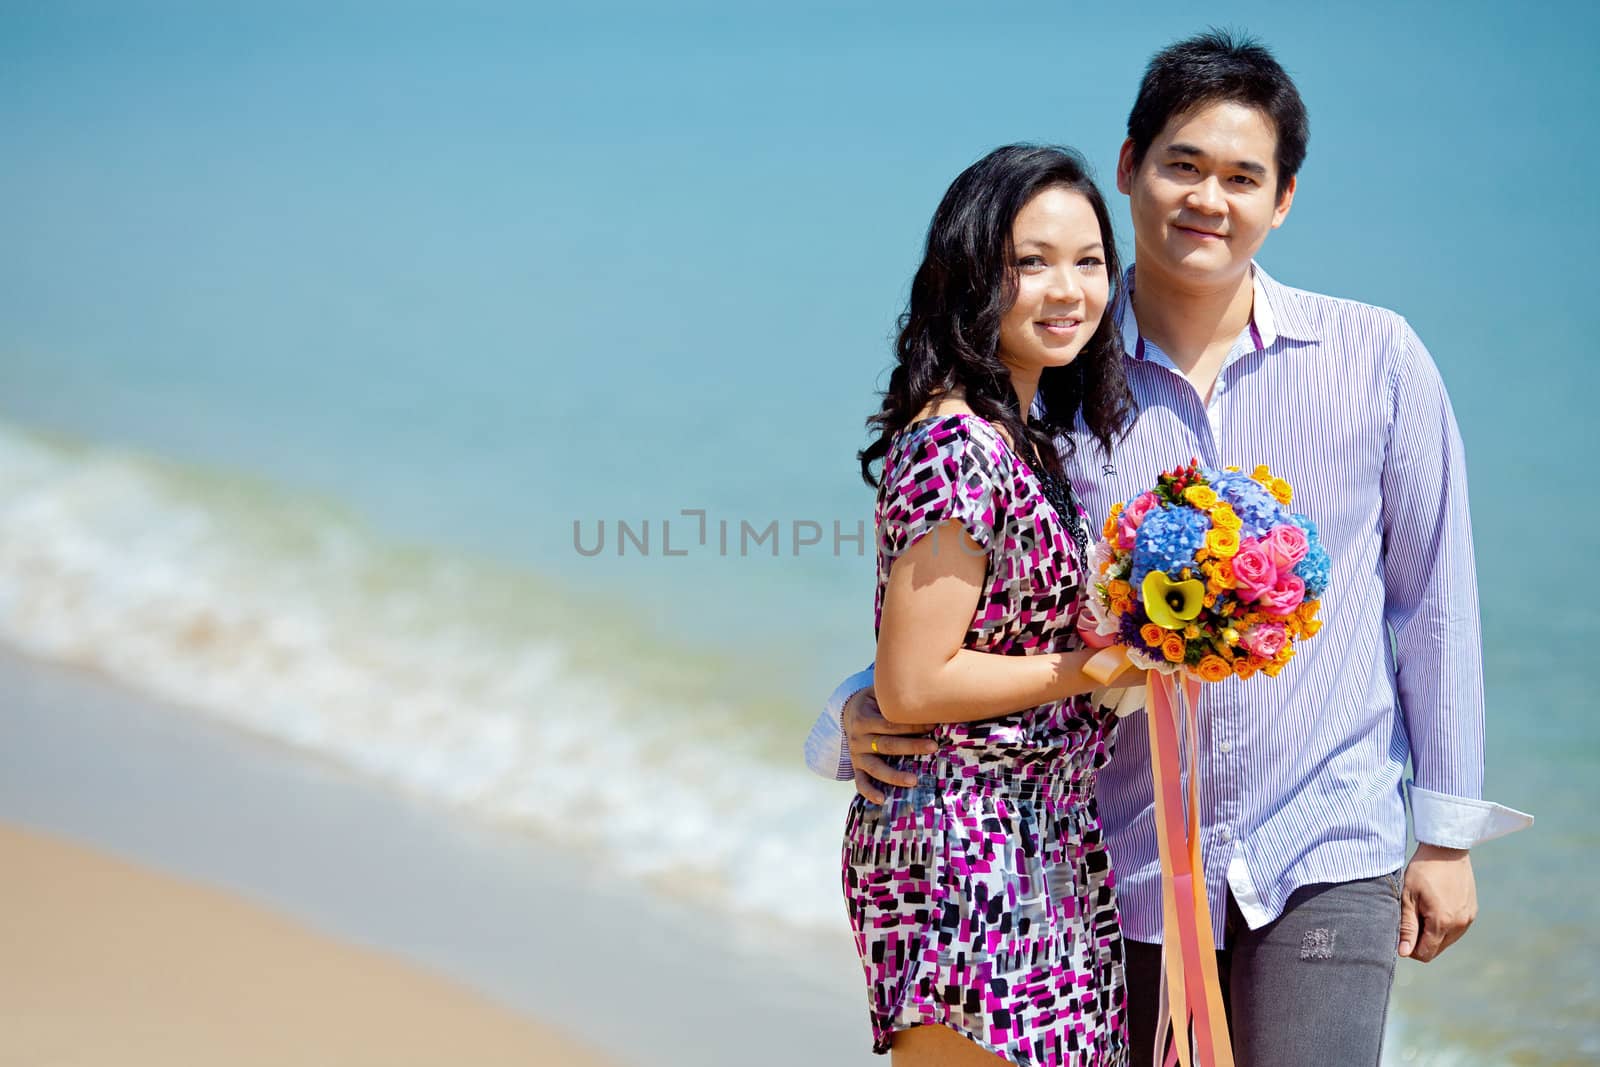 attractive couple standing together in the beach with beautiful bouquet